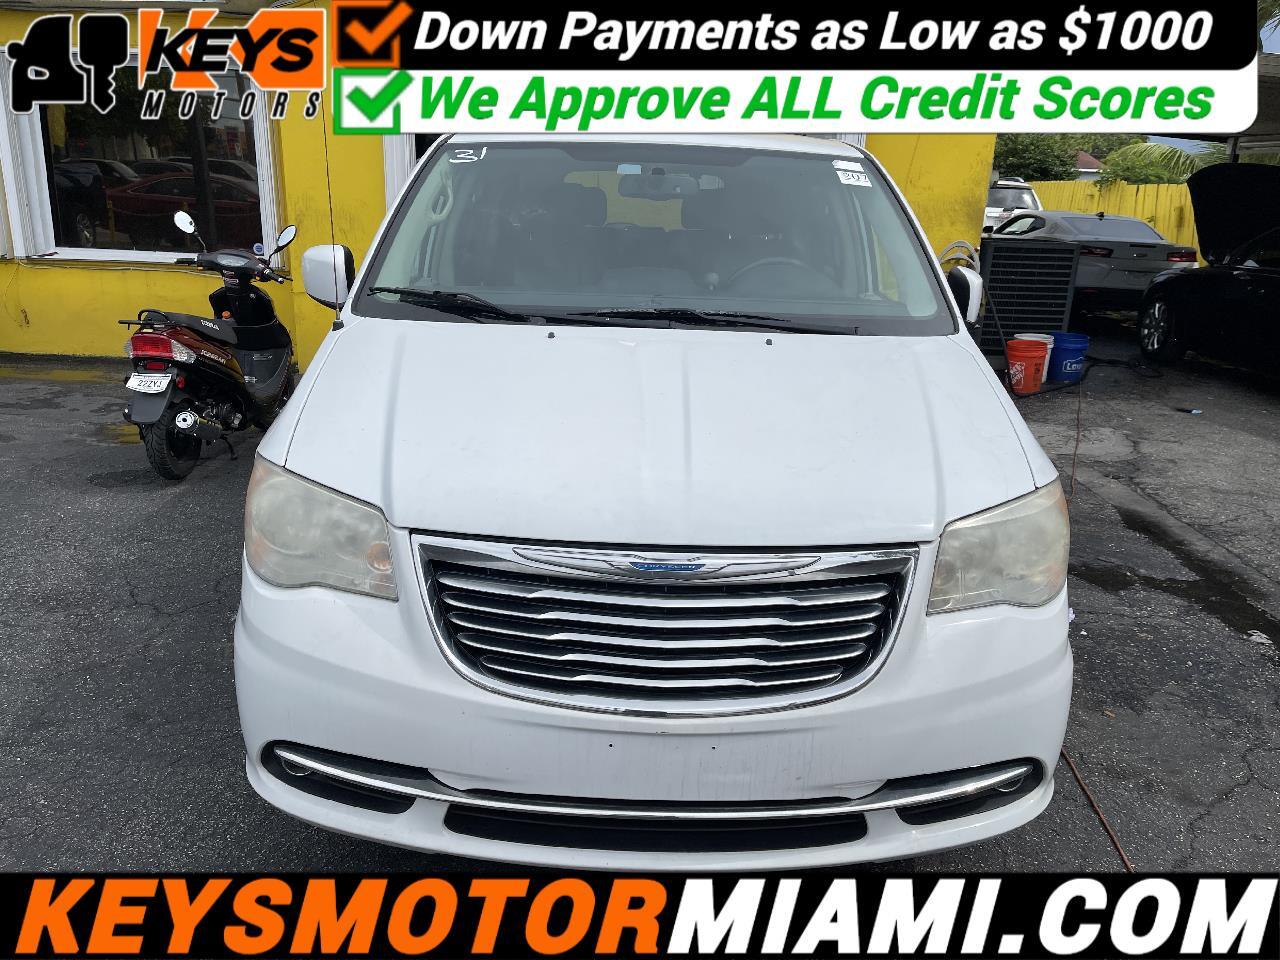 Chrysler Town & Country Touring 2014